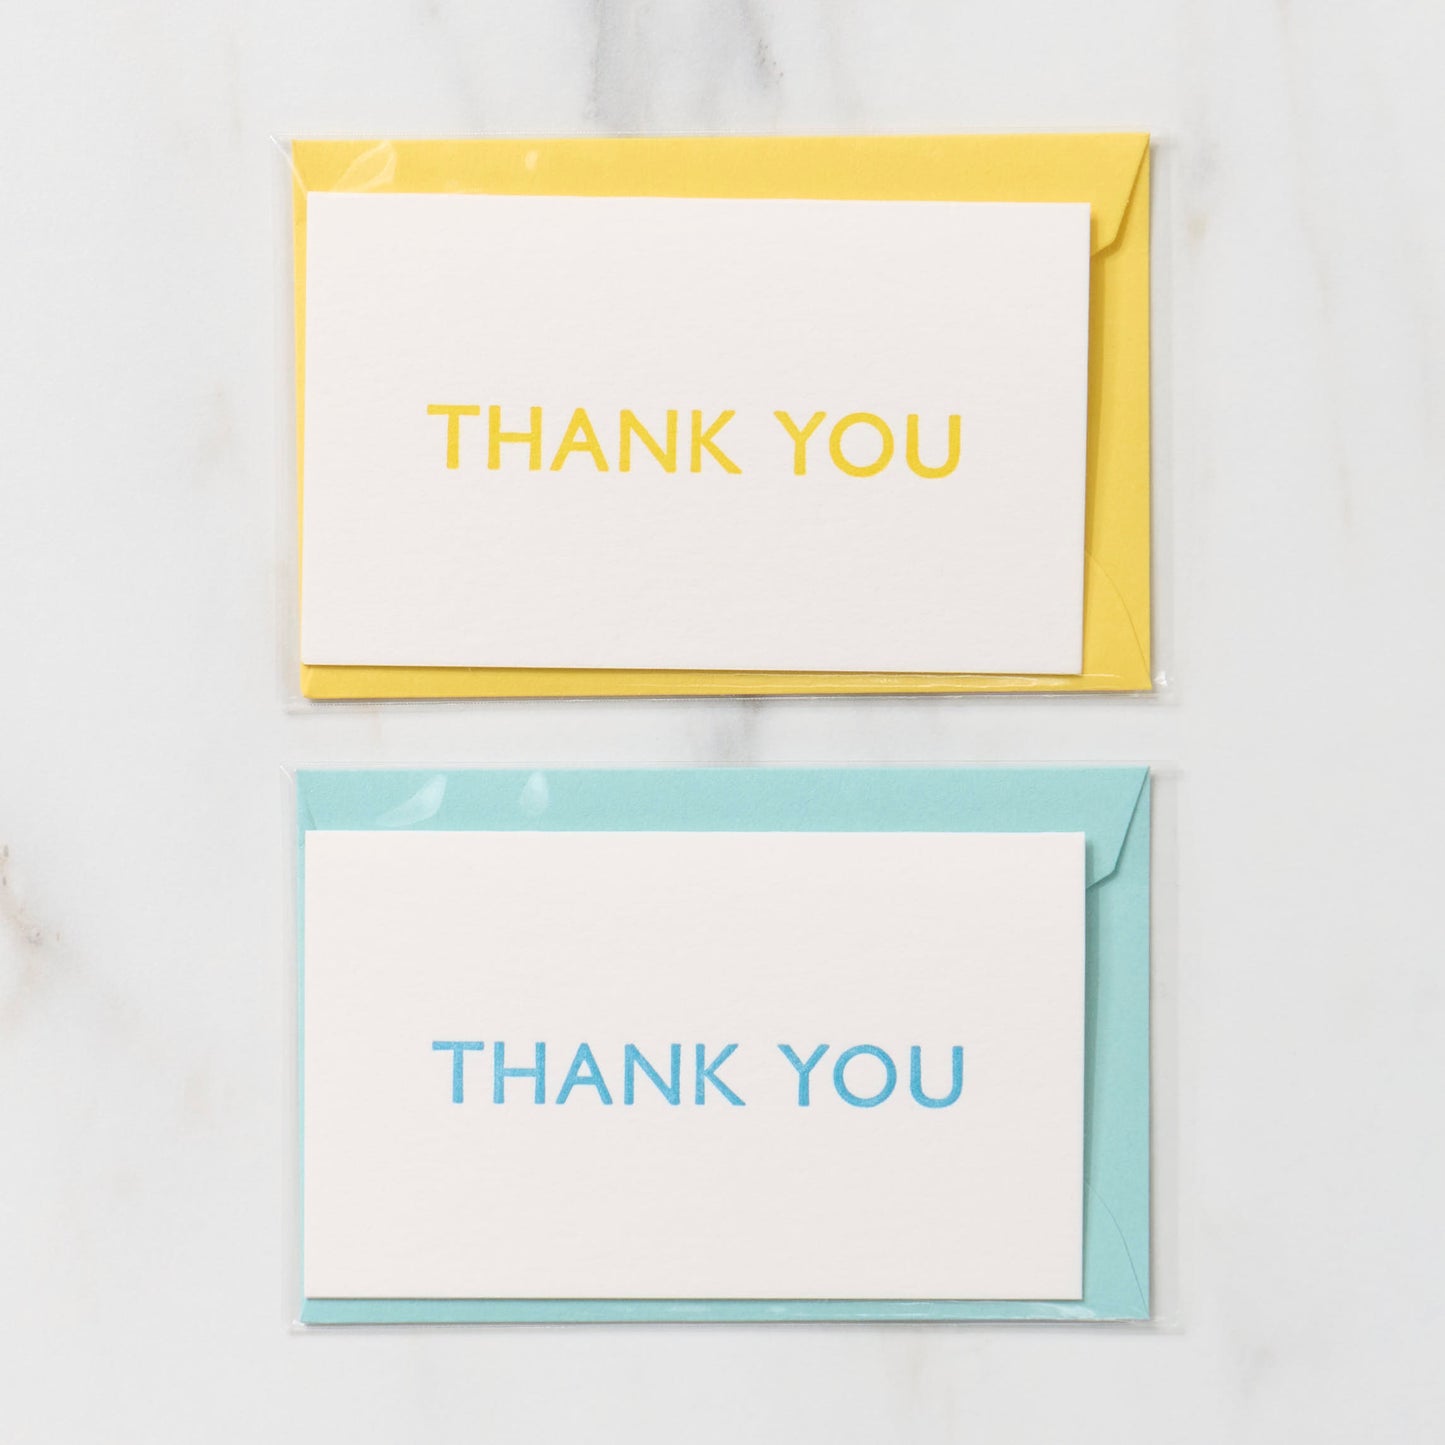 Mini 1 Word Greeting Cards / Letterpress Letters